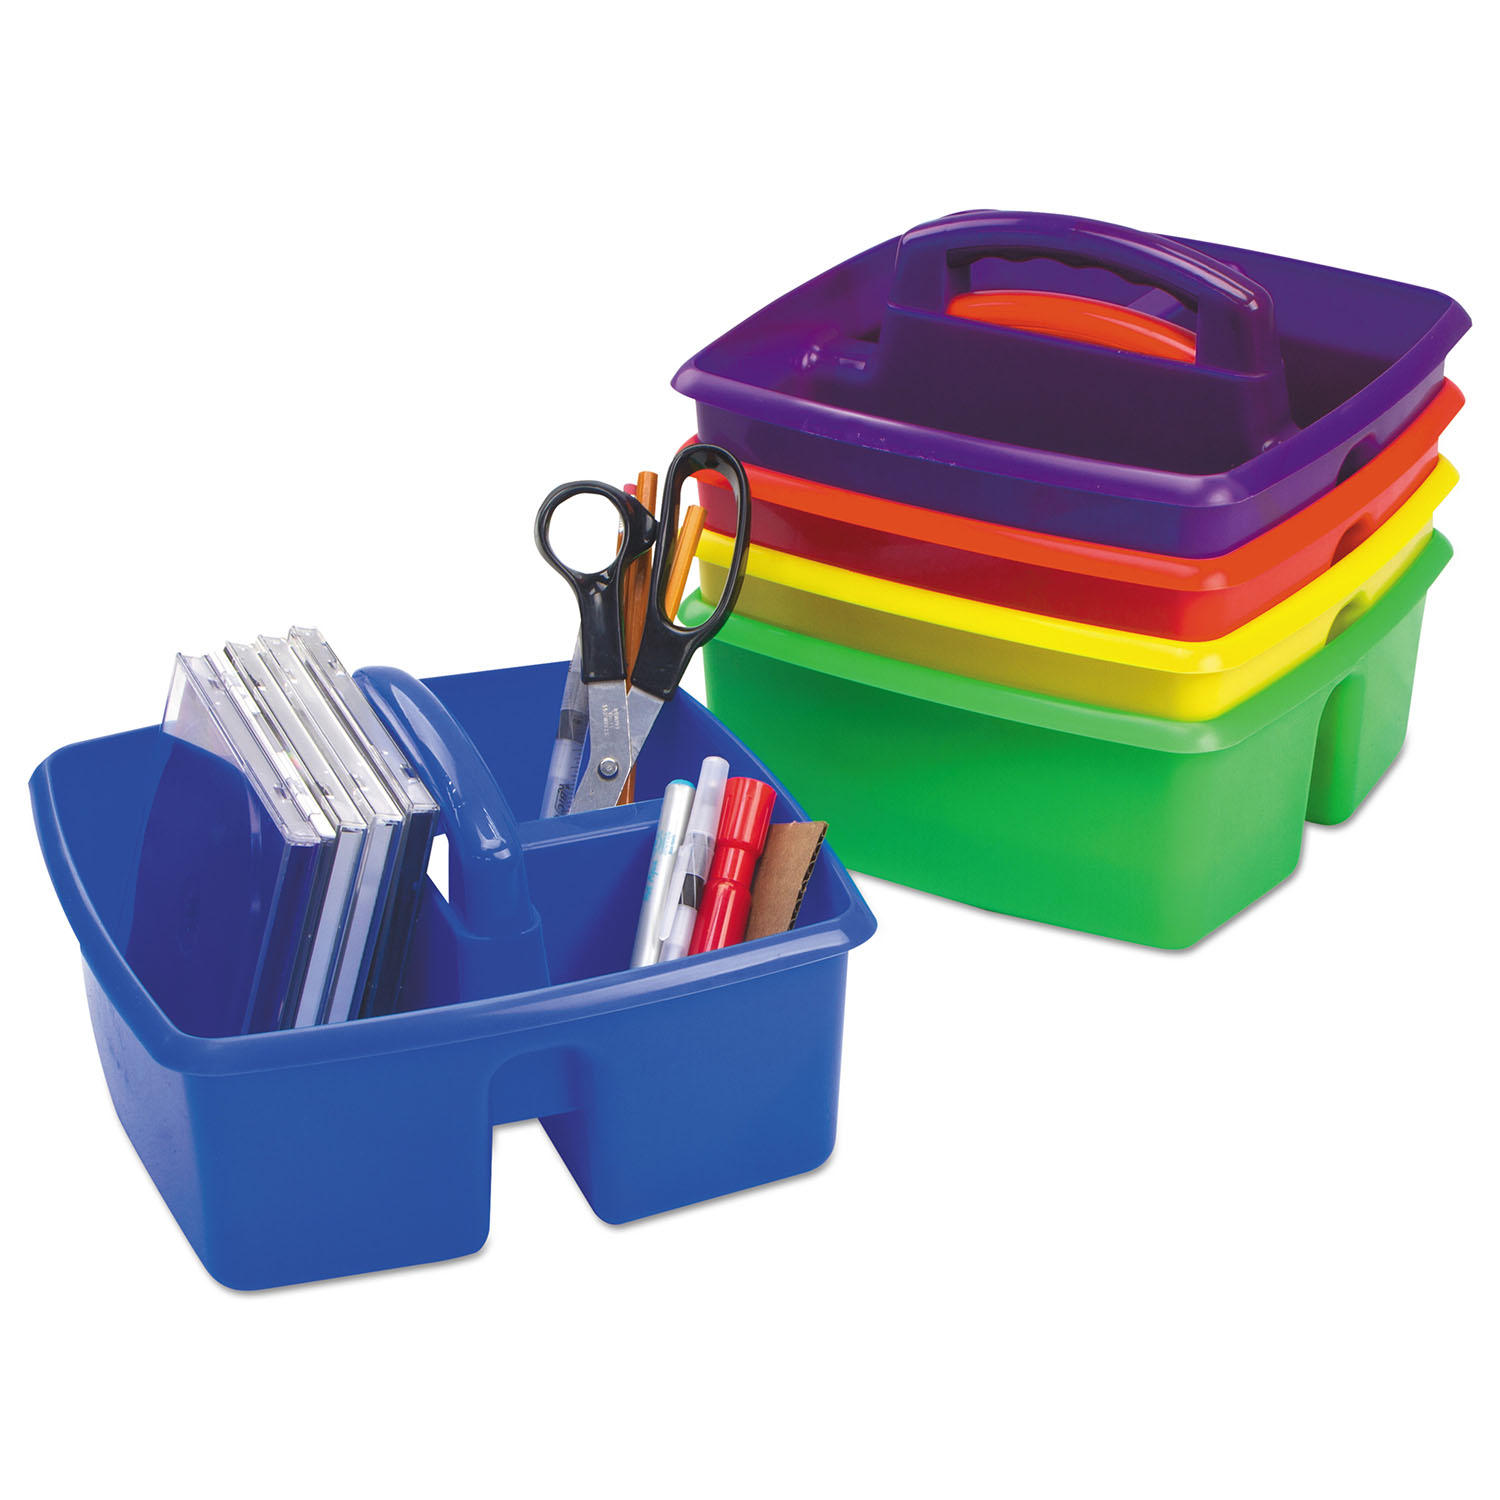 Storex Classroom Caddy - 3 Compartment(s) - 5.3" Height x 9.3" Width x 9.3" Depth - 50% Recycled - Blue - Plastic - 5 / Set